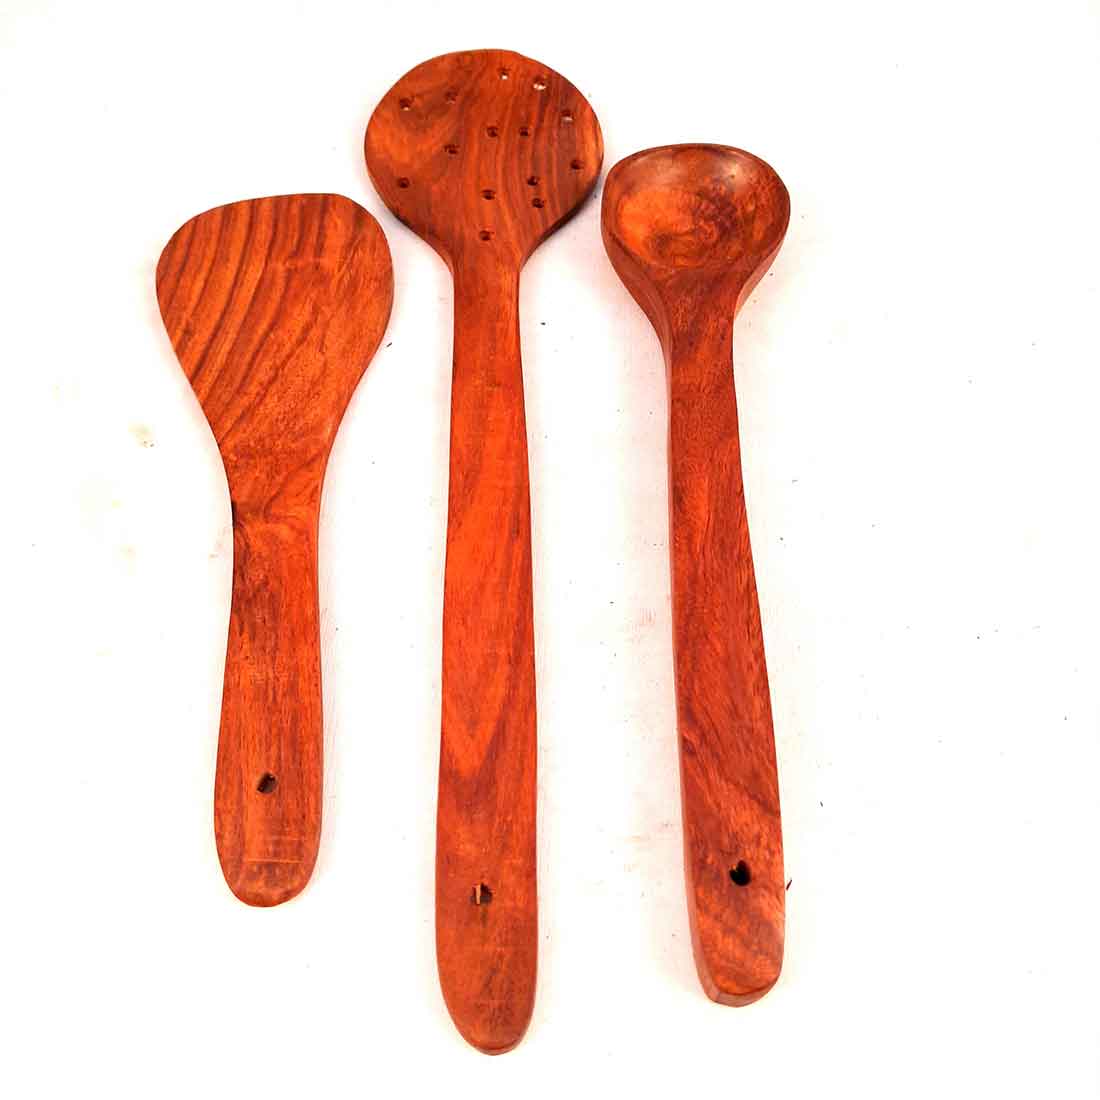 Wooden Spoons - For Non-stick Cookware Cooking & Serving - 15 Inch - Set of  3 - ApkaMart